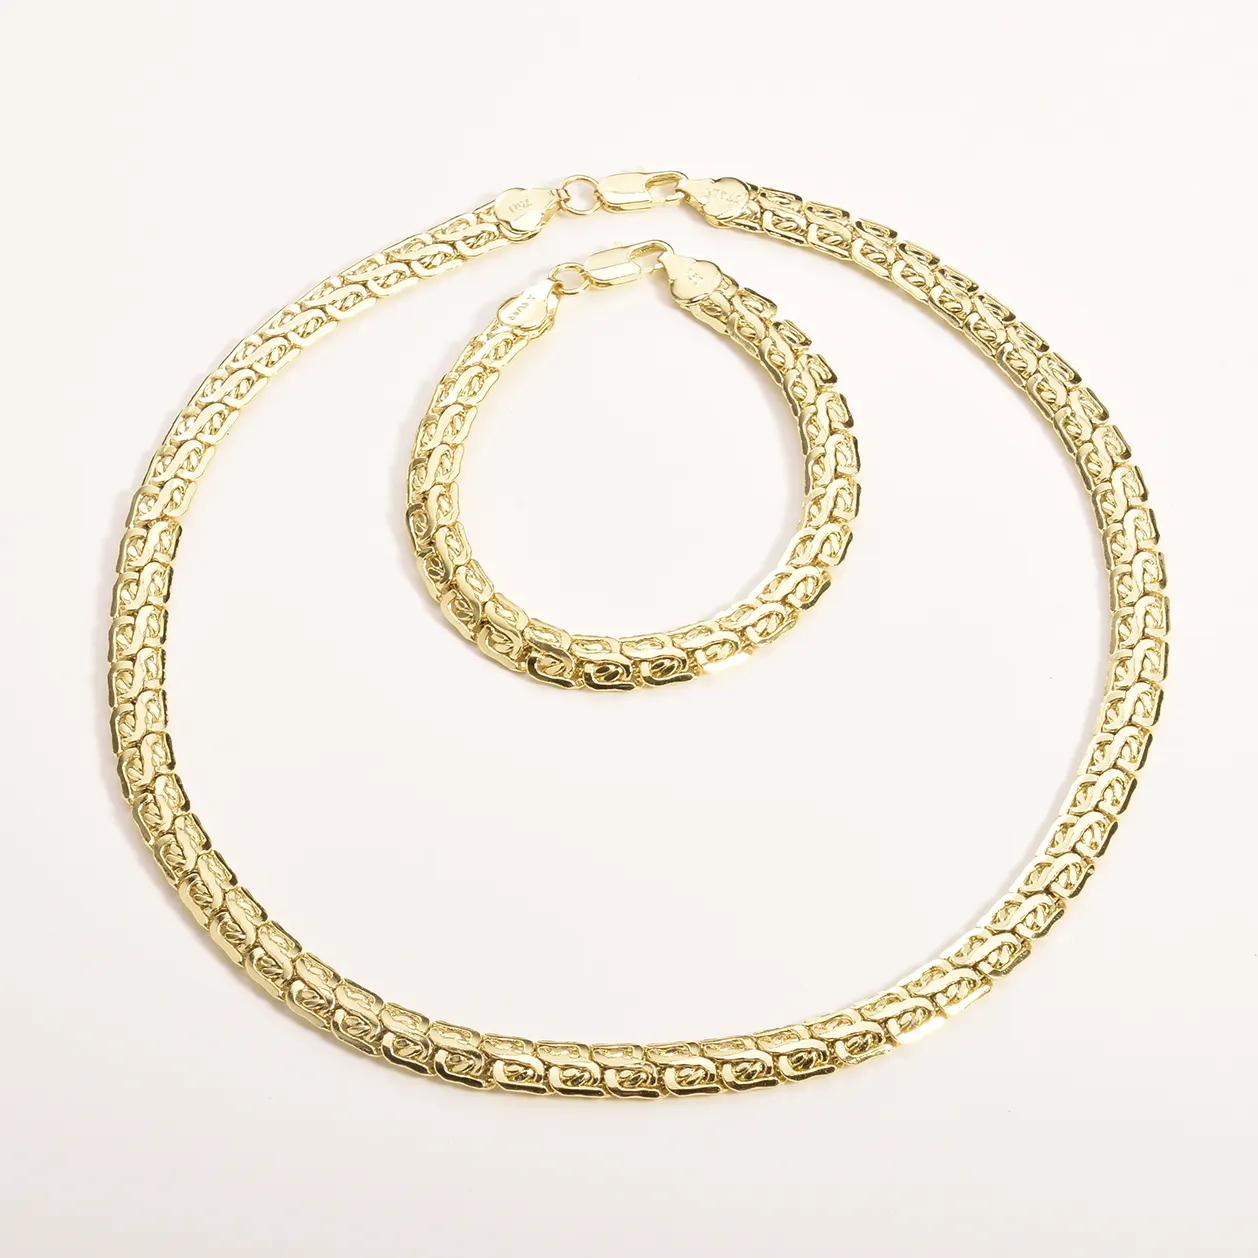 SISIYU 2022 New Gold Hollow Bracelet Necklace Set Fashion Ladies Dubai African Luxury Jewelry Necklace Wholesale Accessories